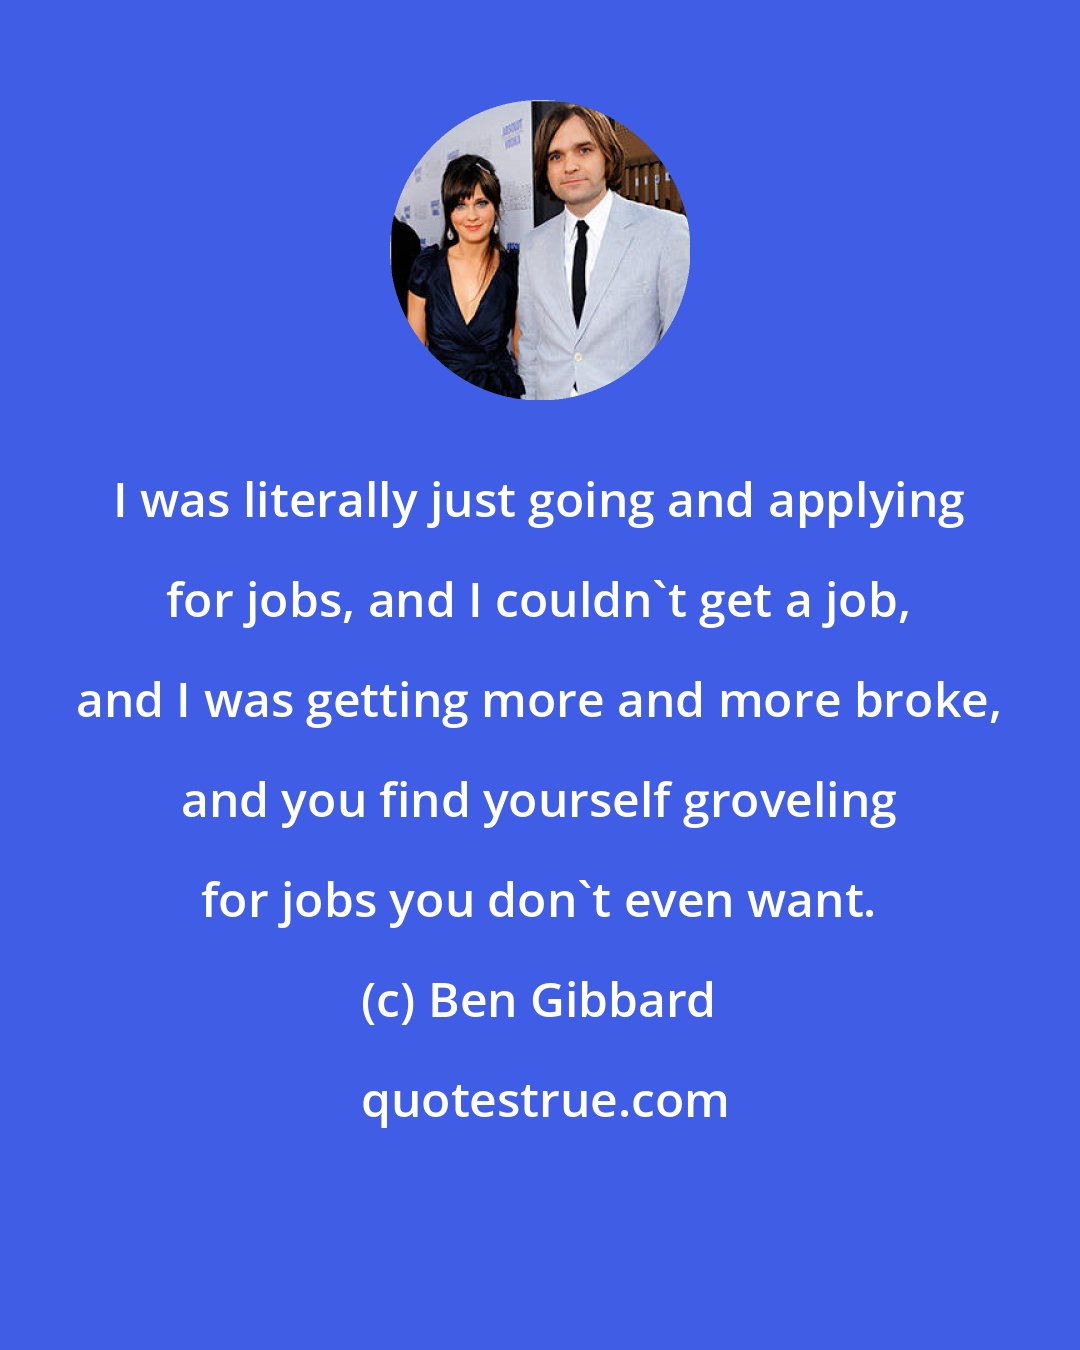 Ben Gibbard: I was literally just going and applying for jobs, and I couldn't get a job, and I was getting more and more broke, and you find yourself groveling for jobs you don't even want.